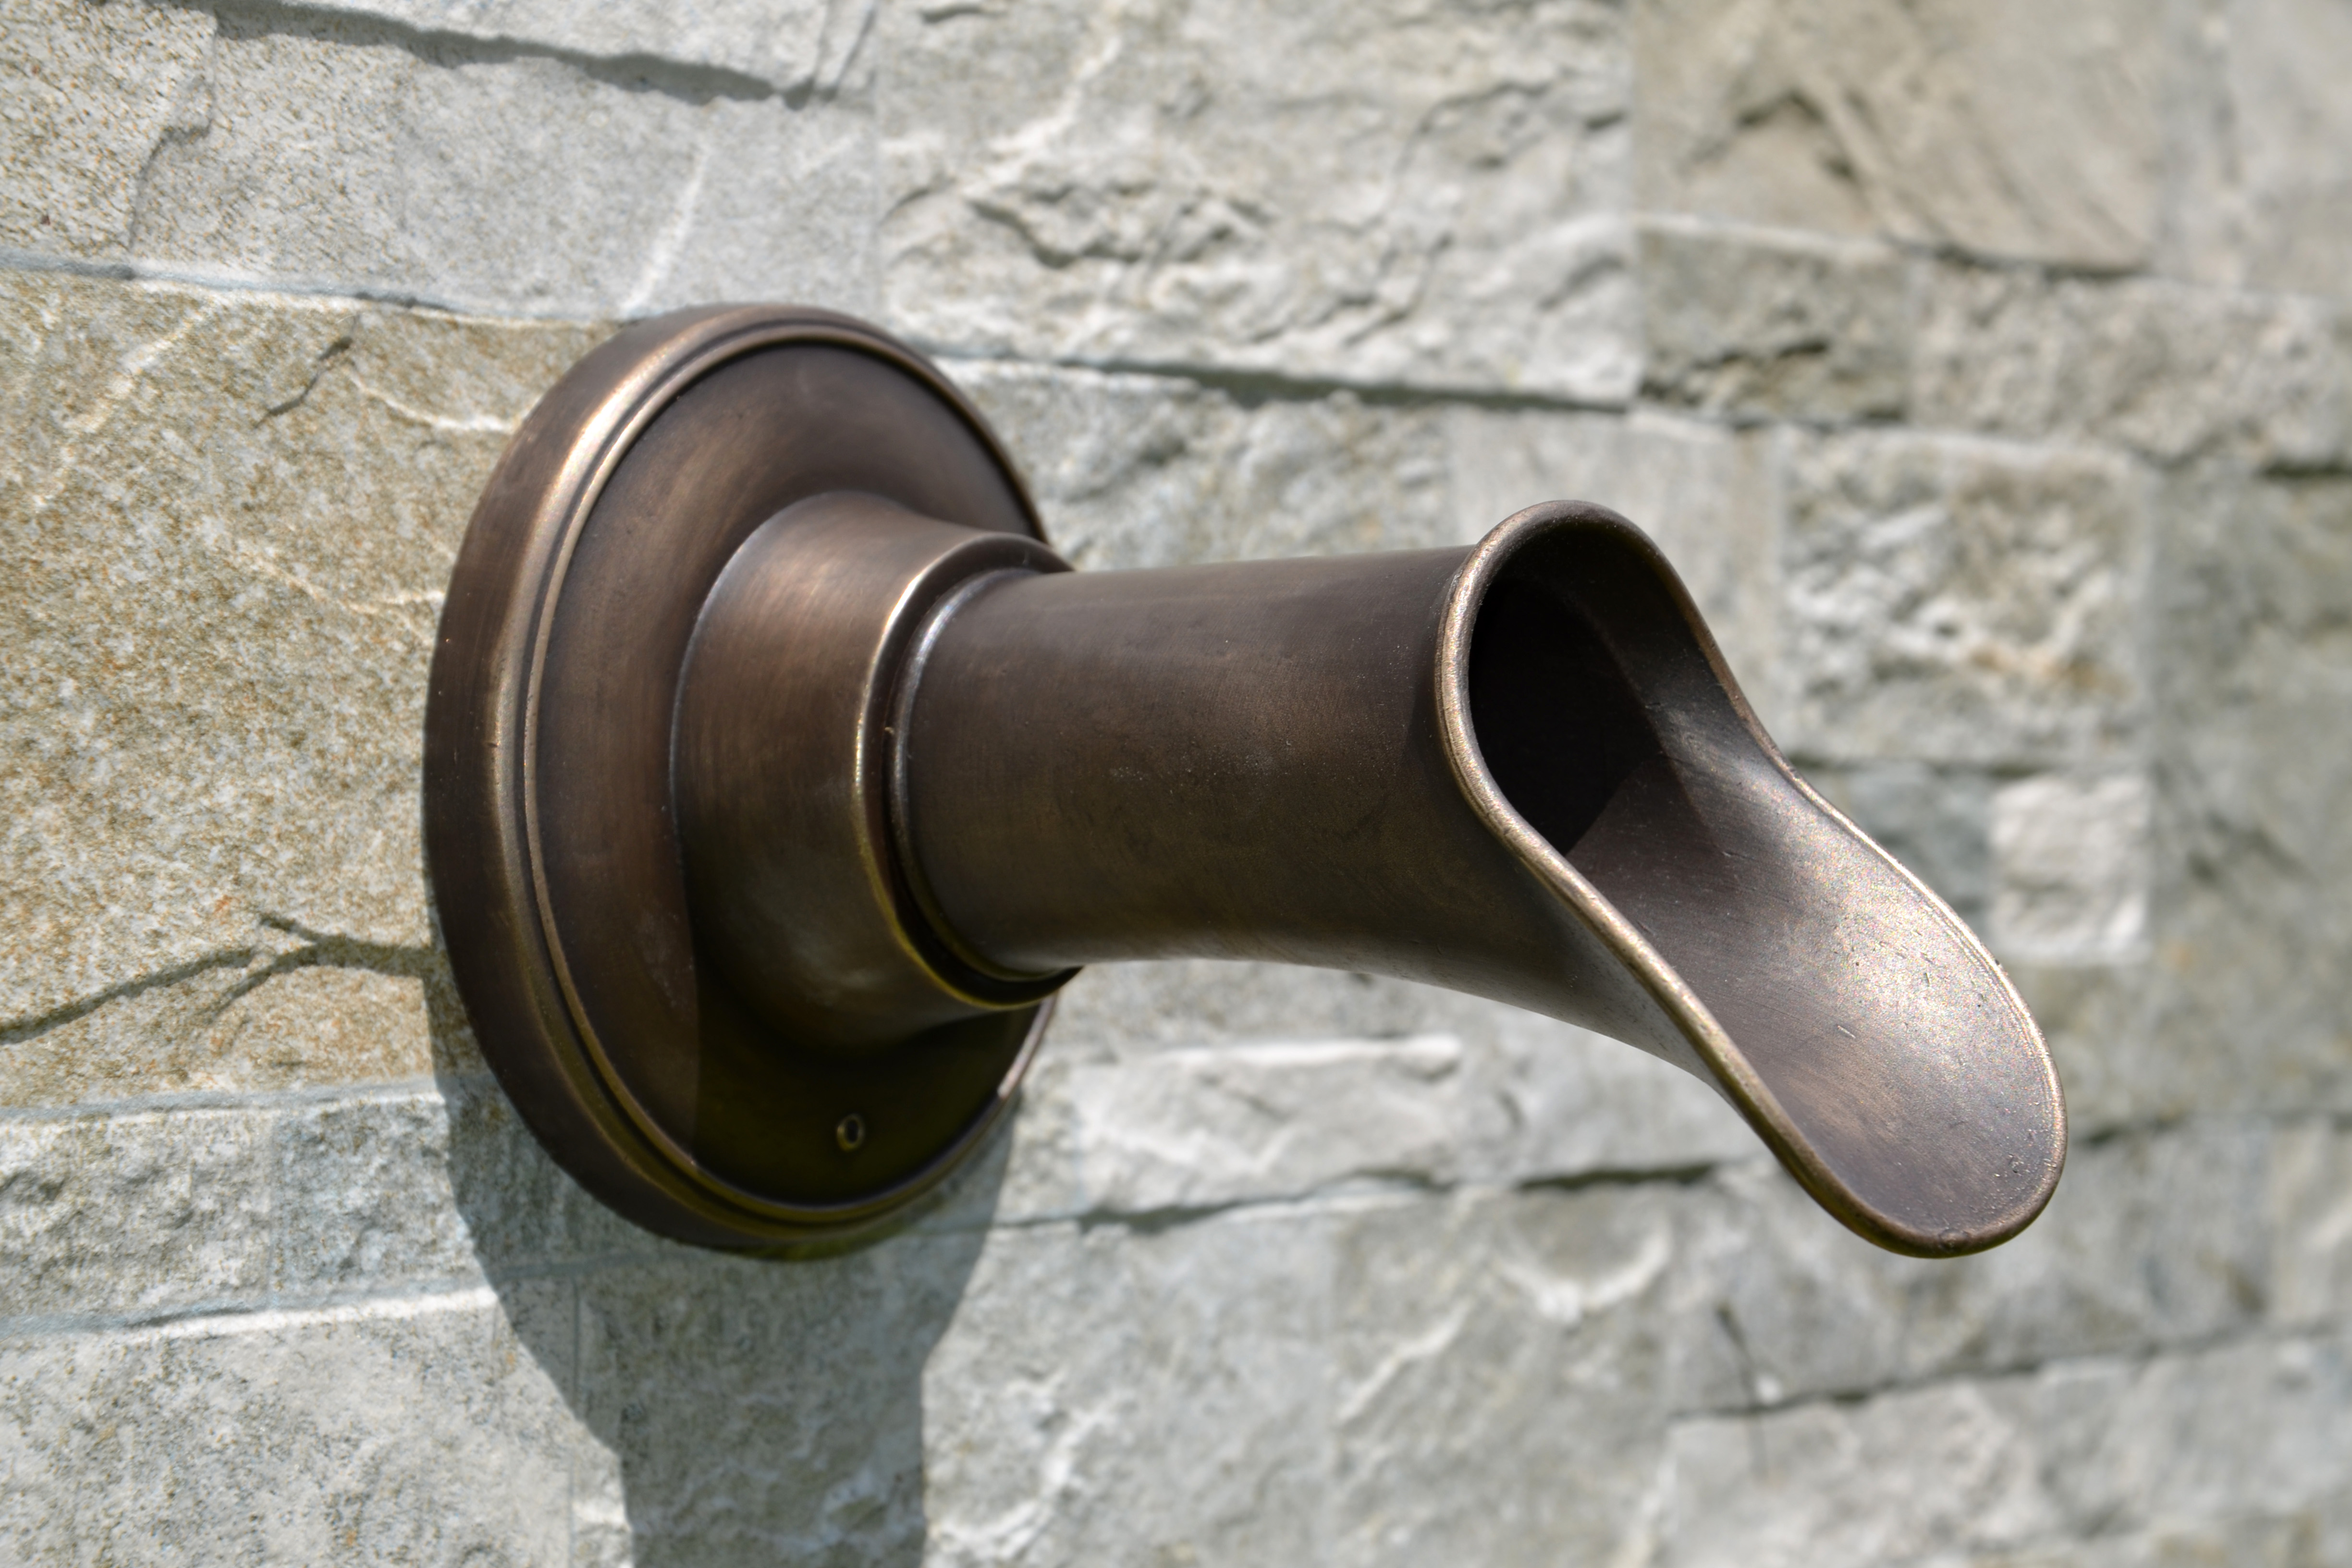 small Oona bronze fountain spout on a stone background